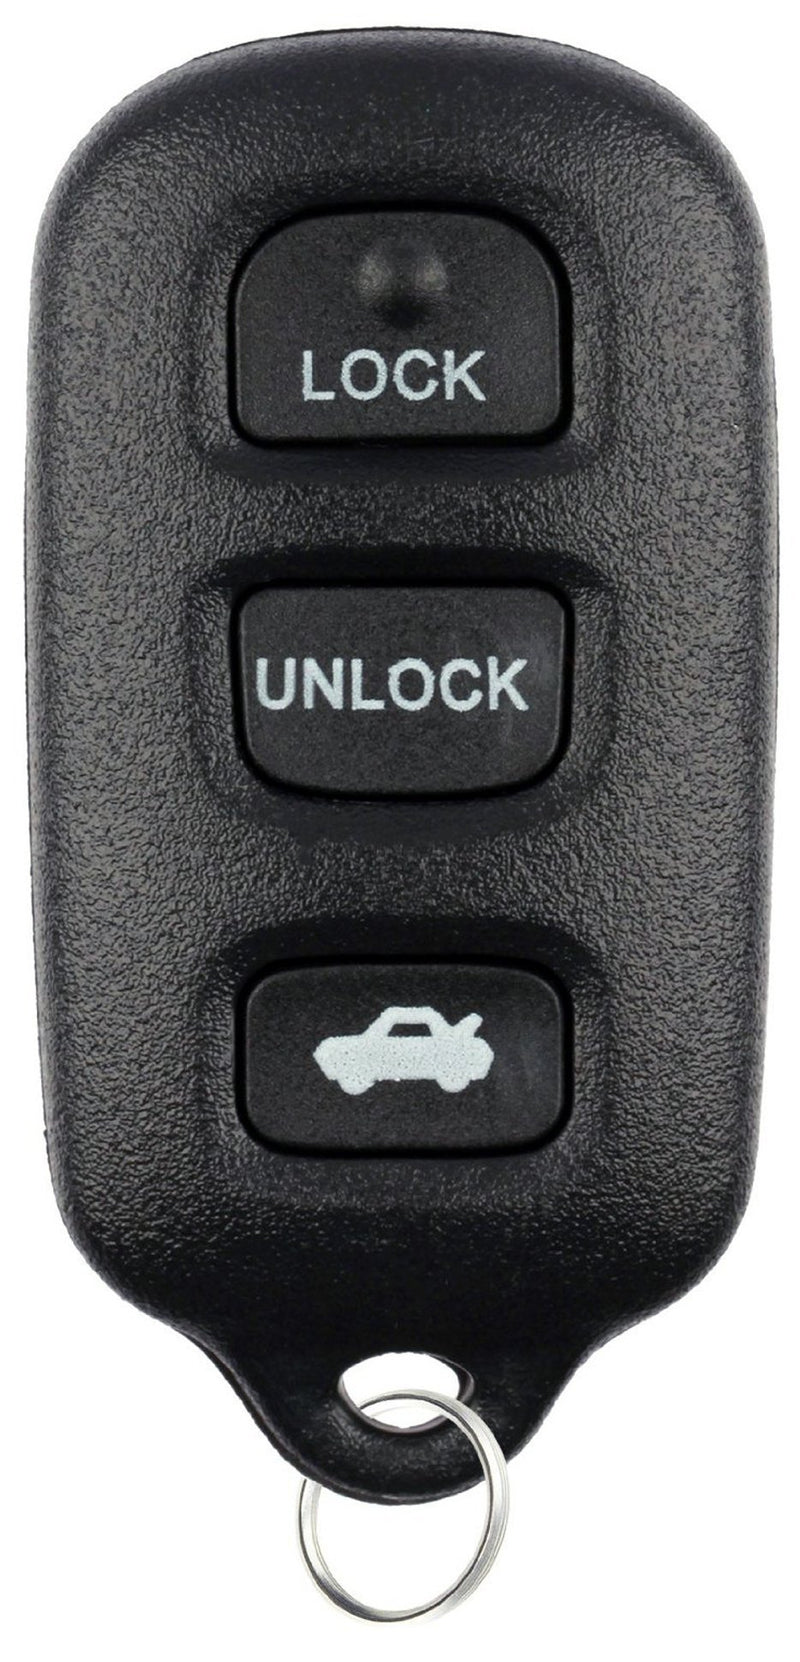 KeylessOption Keyless Entry Remote Control Fob Car Key Replacement for GQ43VT14T